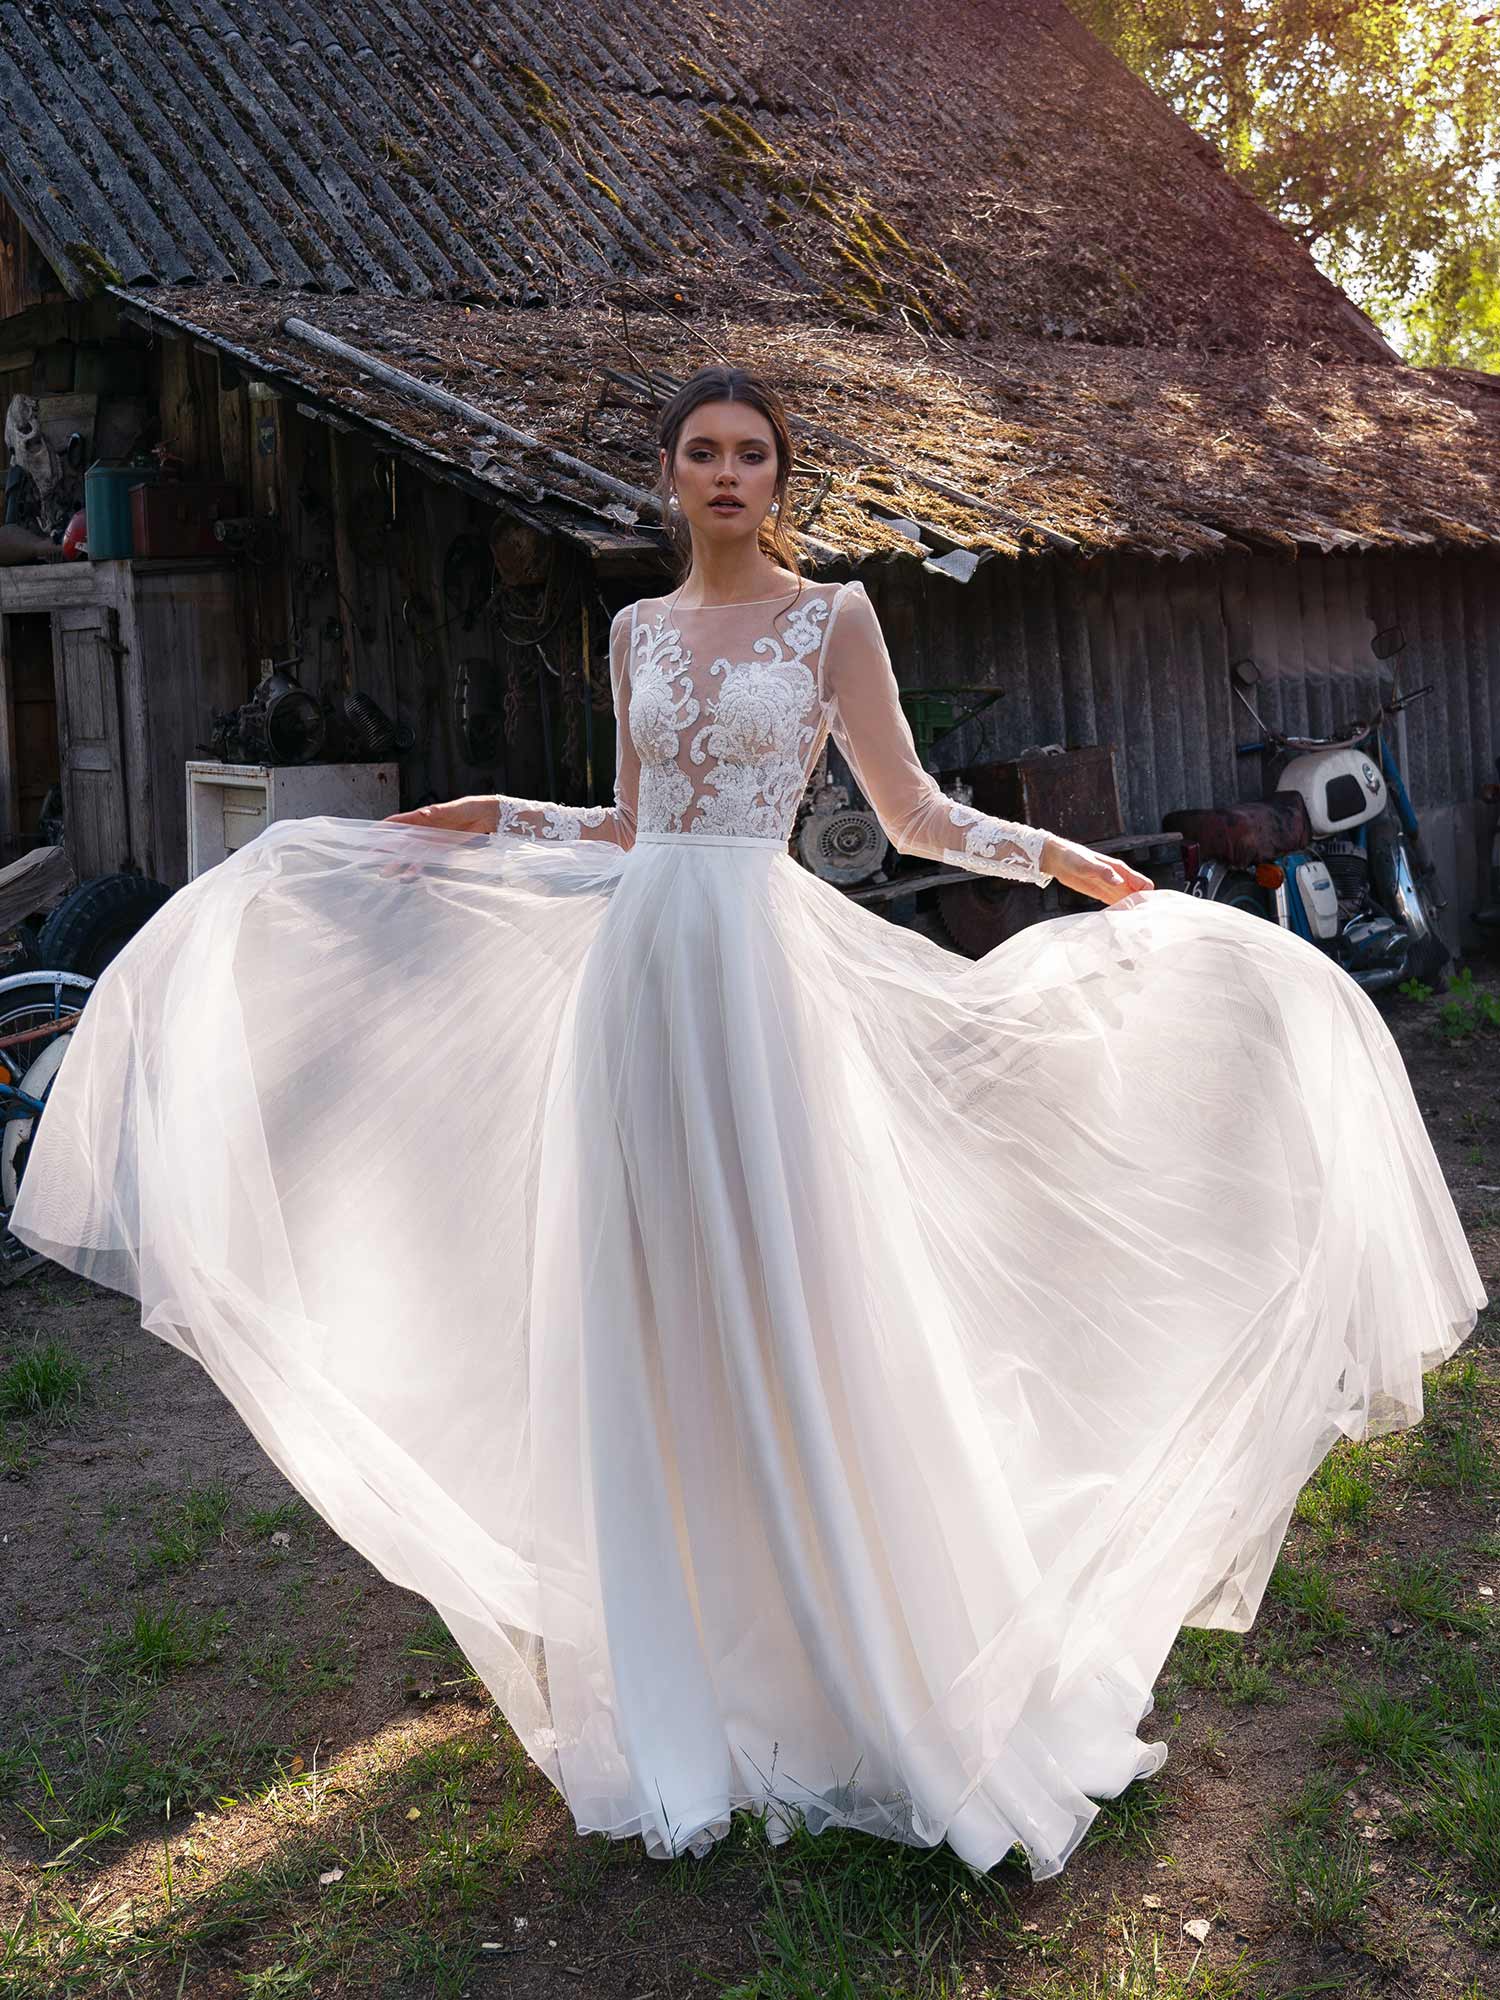 Illusion long-sleeved wedding dress with embroidery